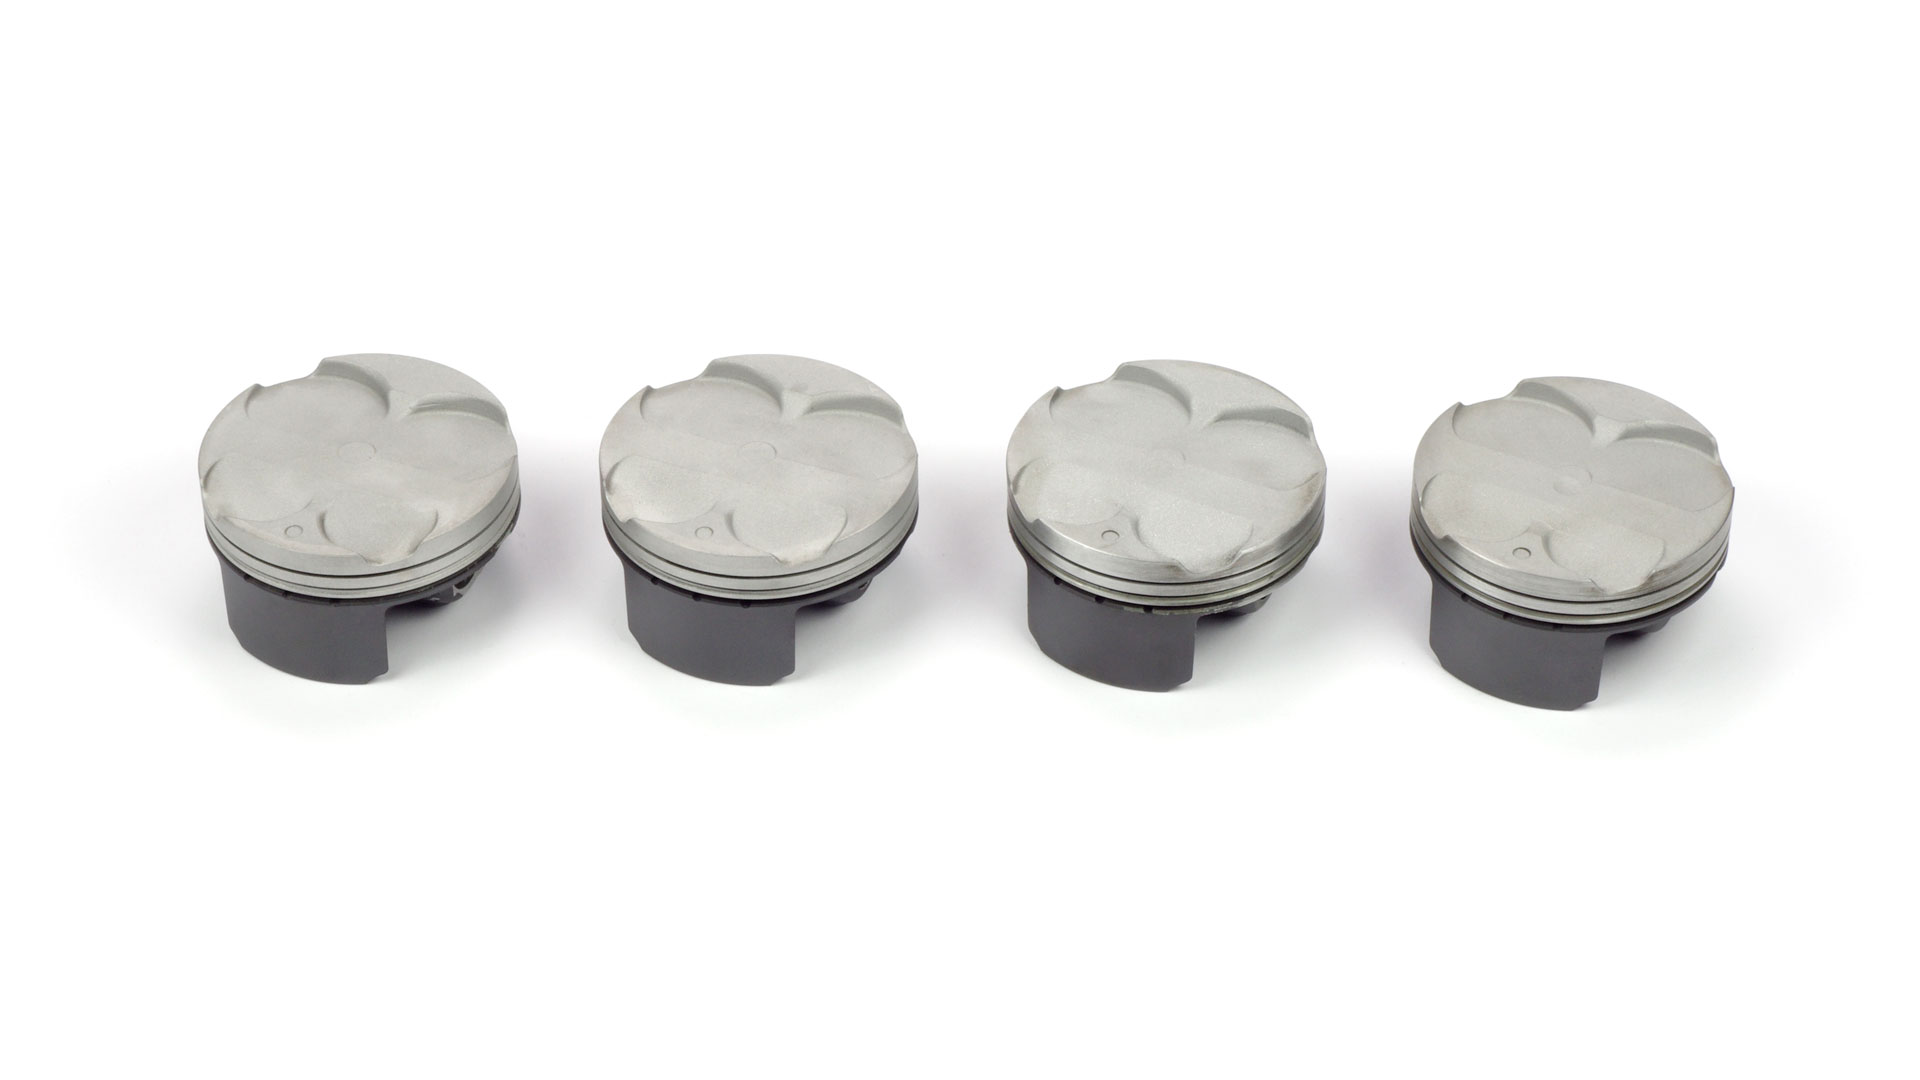 Graphite coating maxi scooter pistons